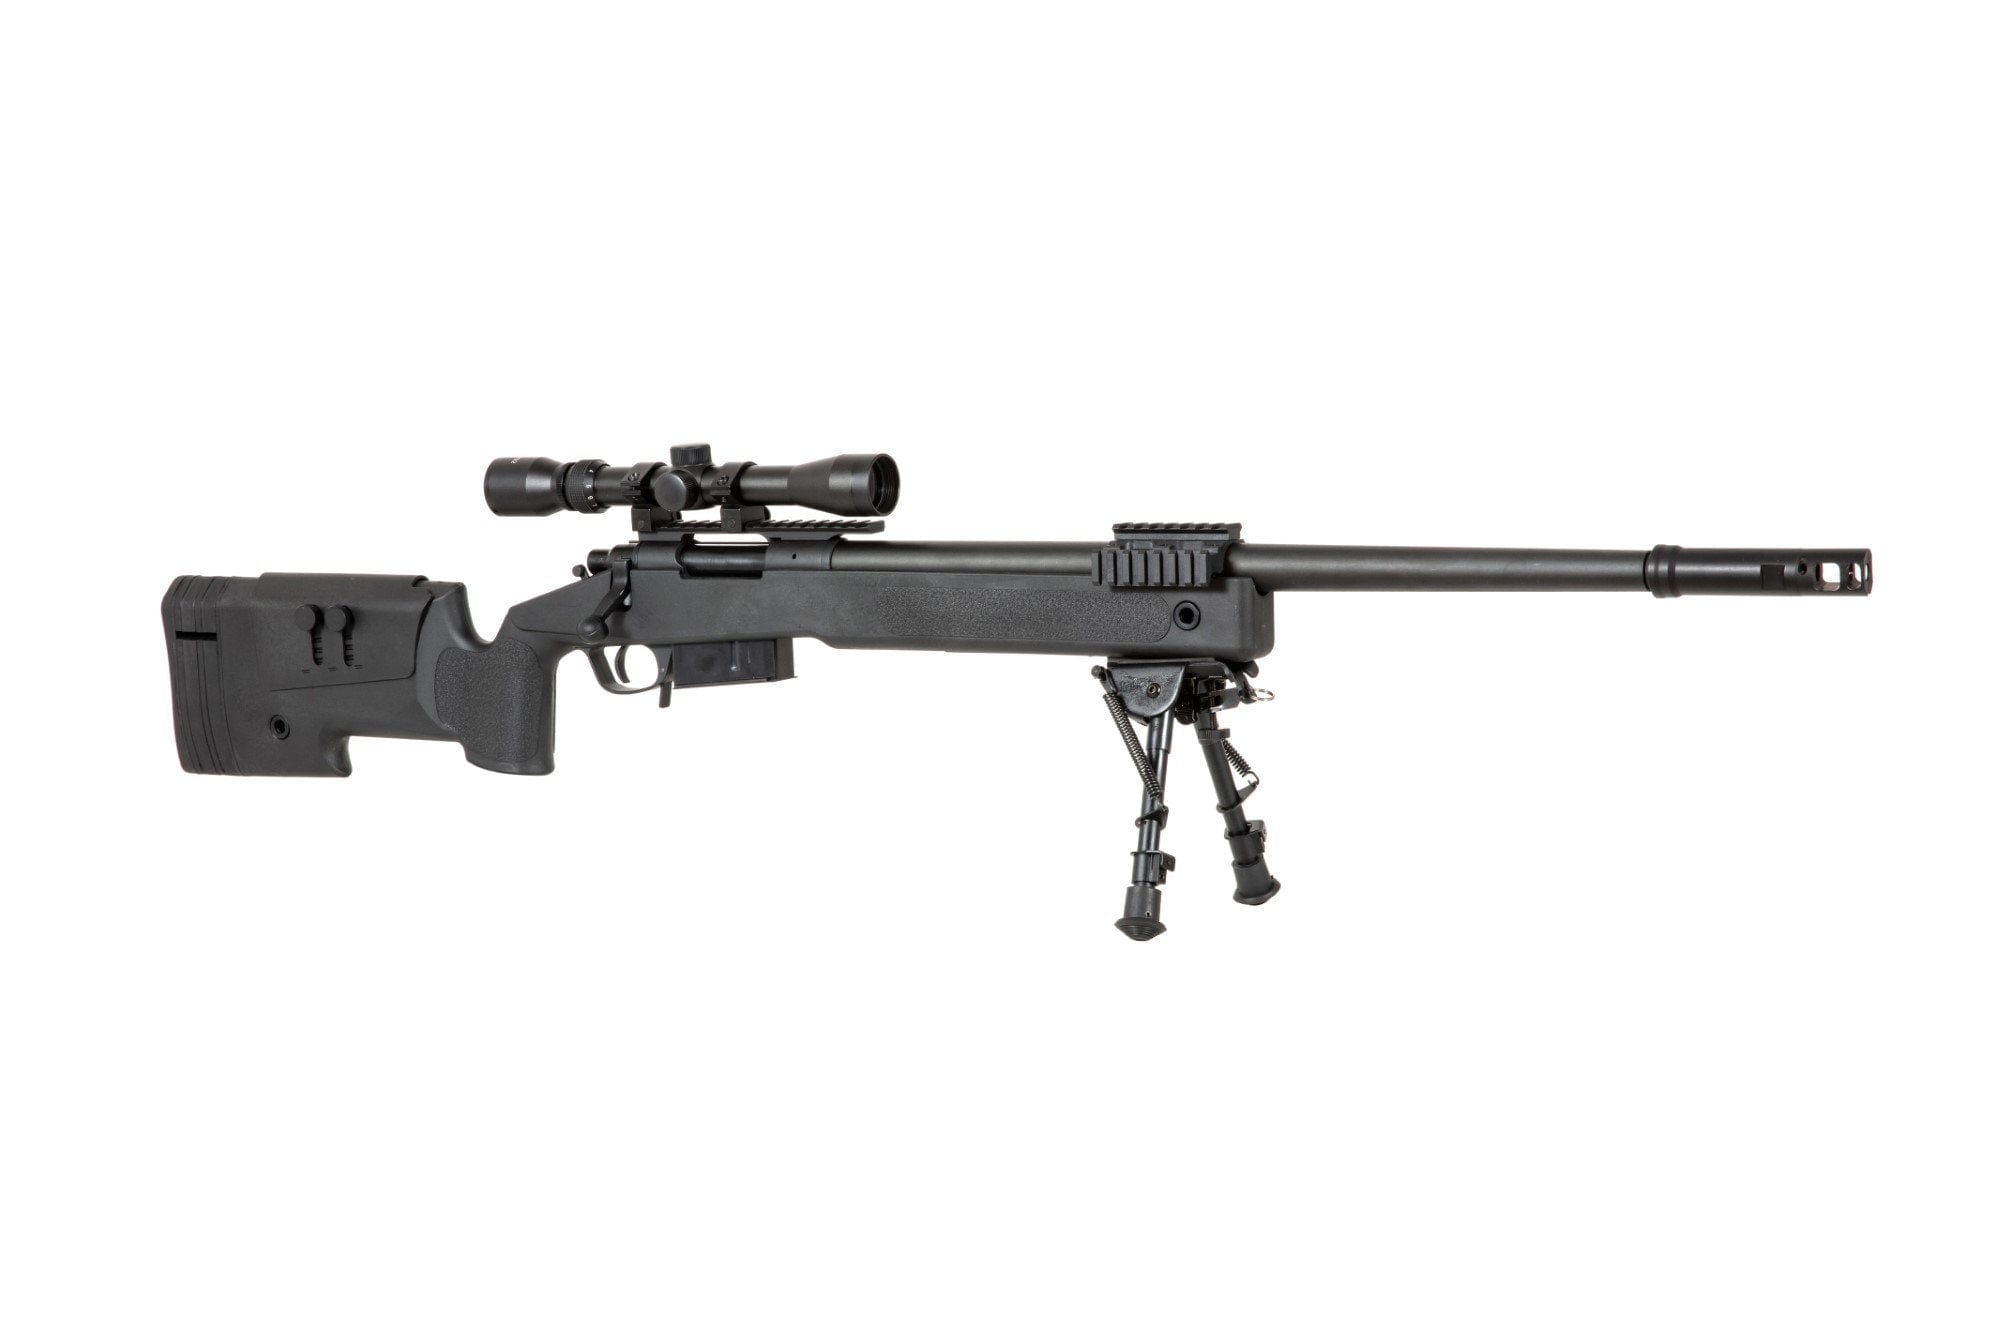 SA-CORE ™ S03 High Velocity Replica Sniper Rifle with Scope and Bipod - Black by Specna Arms on Airsoft Mania Europe